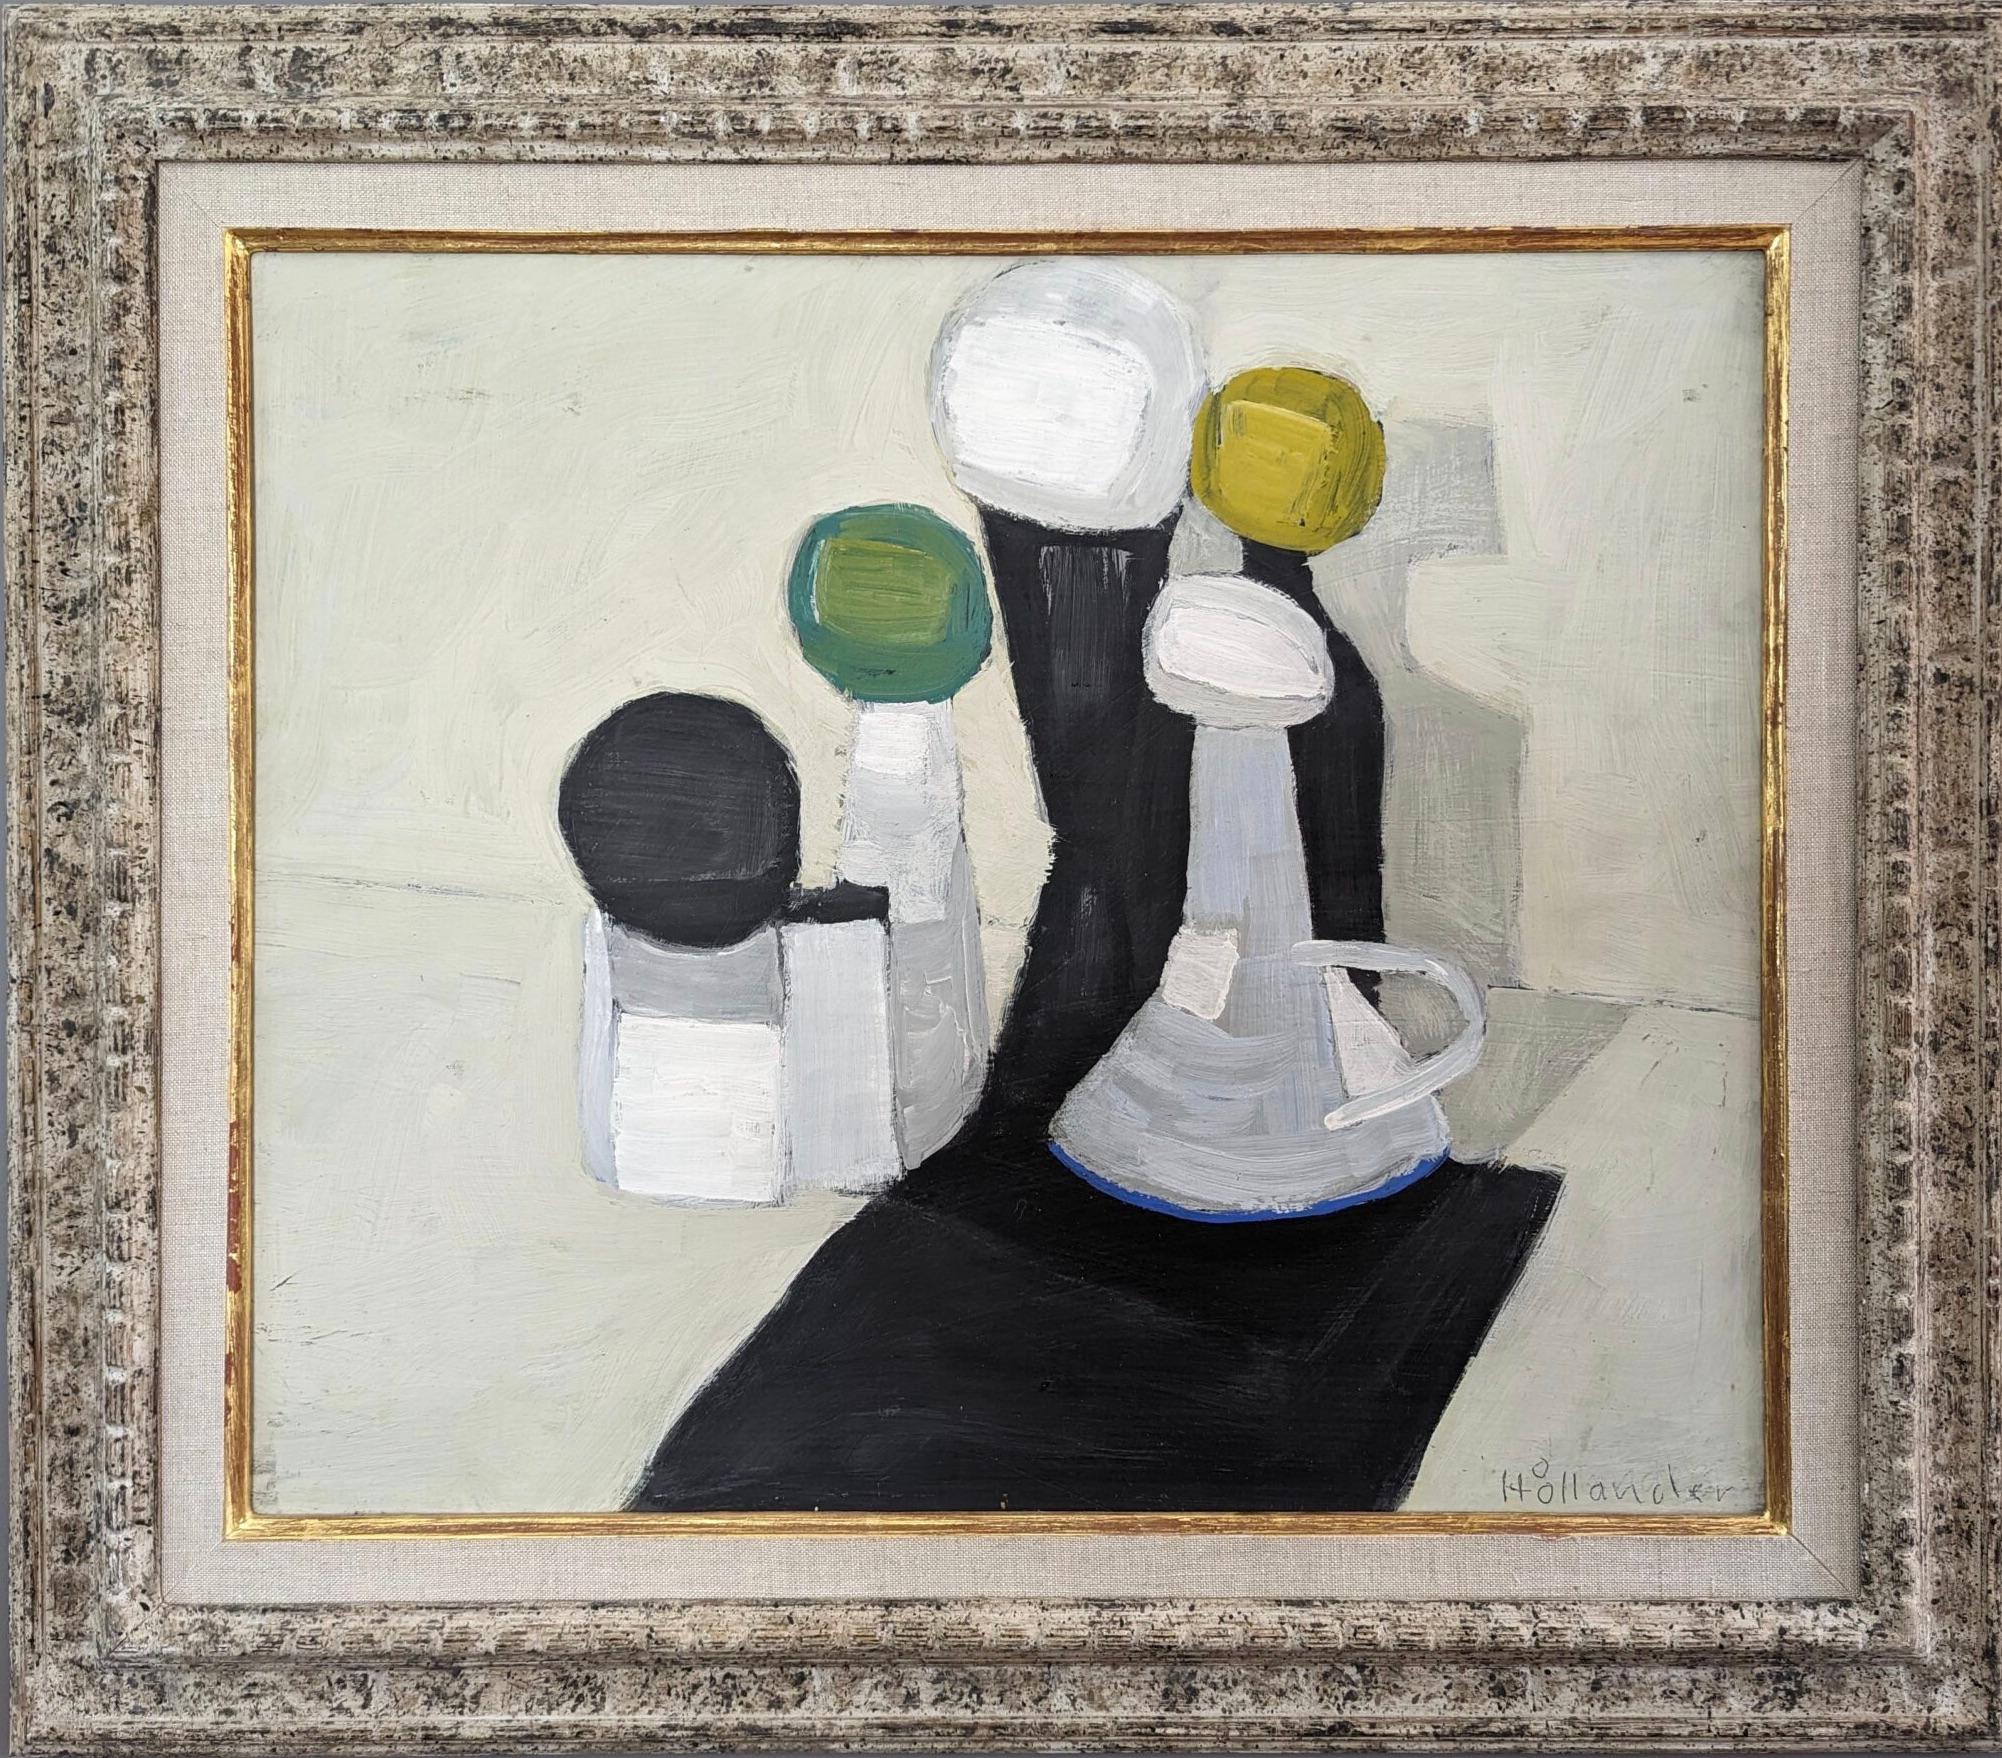 YELLOW & GREEN BALL
Size: 62.5 x 71.5 cm (including frame)
Oil on Board

A striking original mid century modernist composition, painted onto board and dated 1969 on the reverse by the established Swedish artist Gunnar Hållander (1915-1980), whose